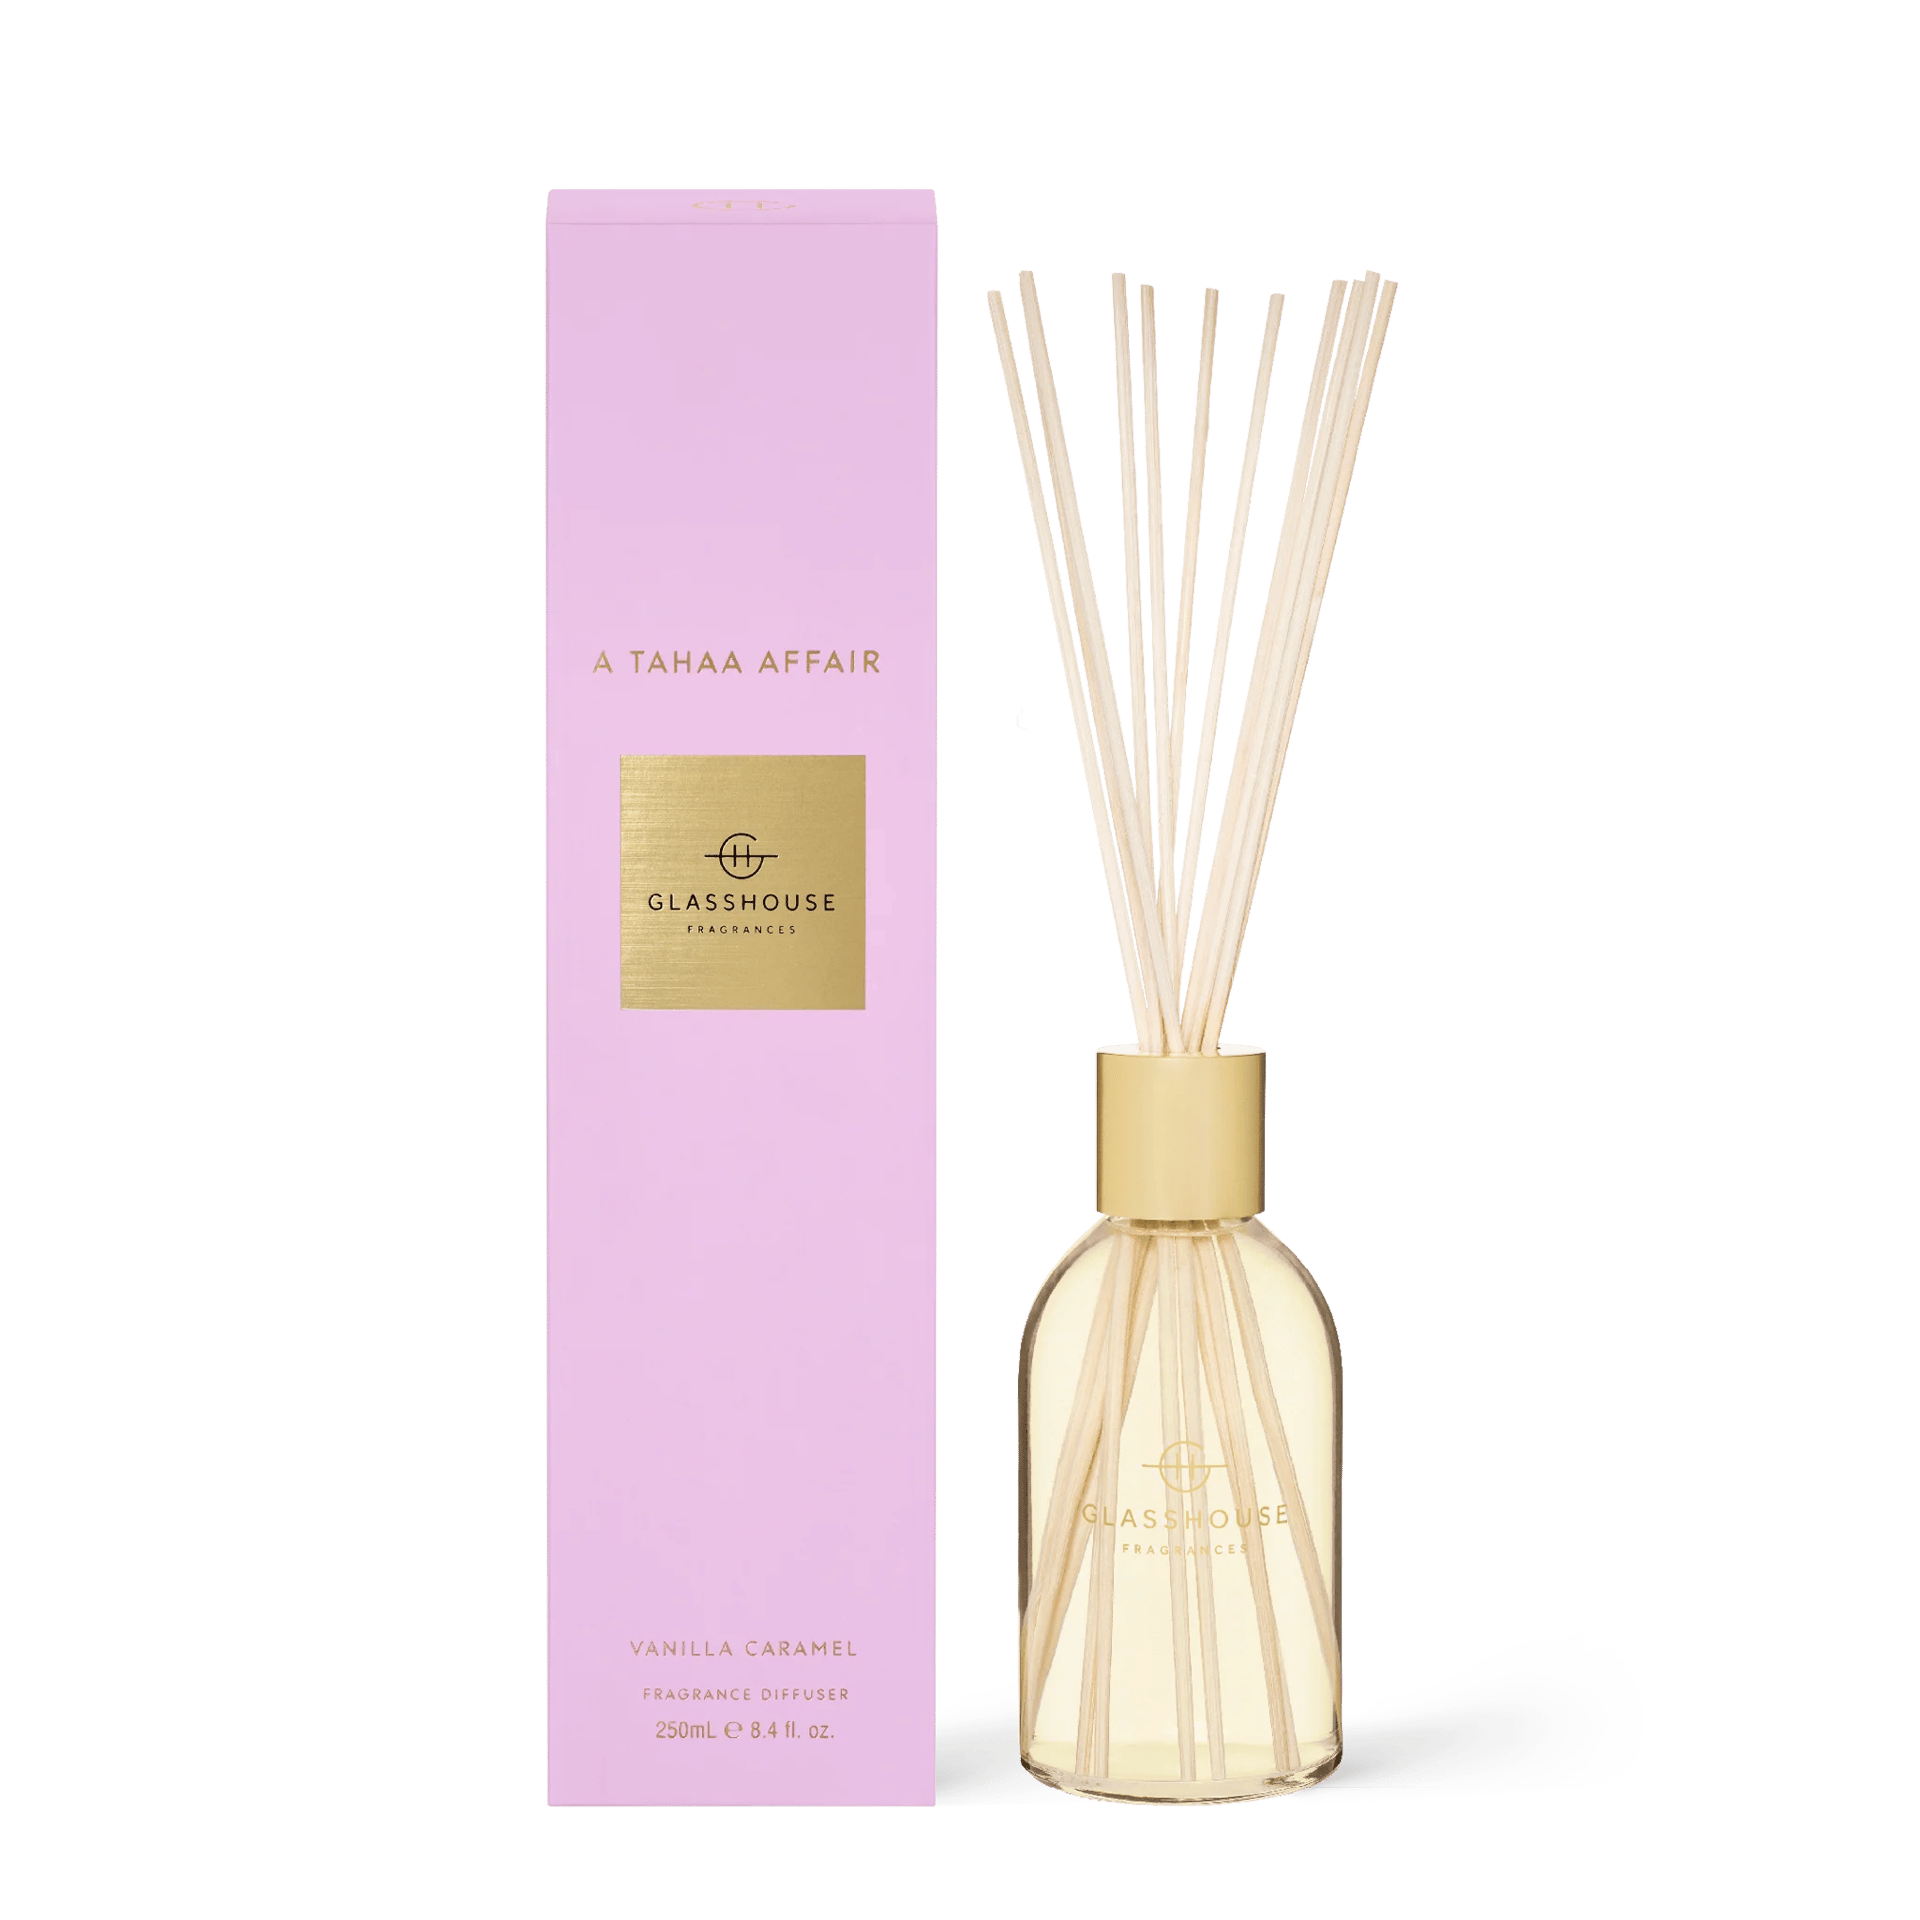 Tahaa - Glasshouse Diffuser with a pink box.